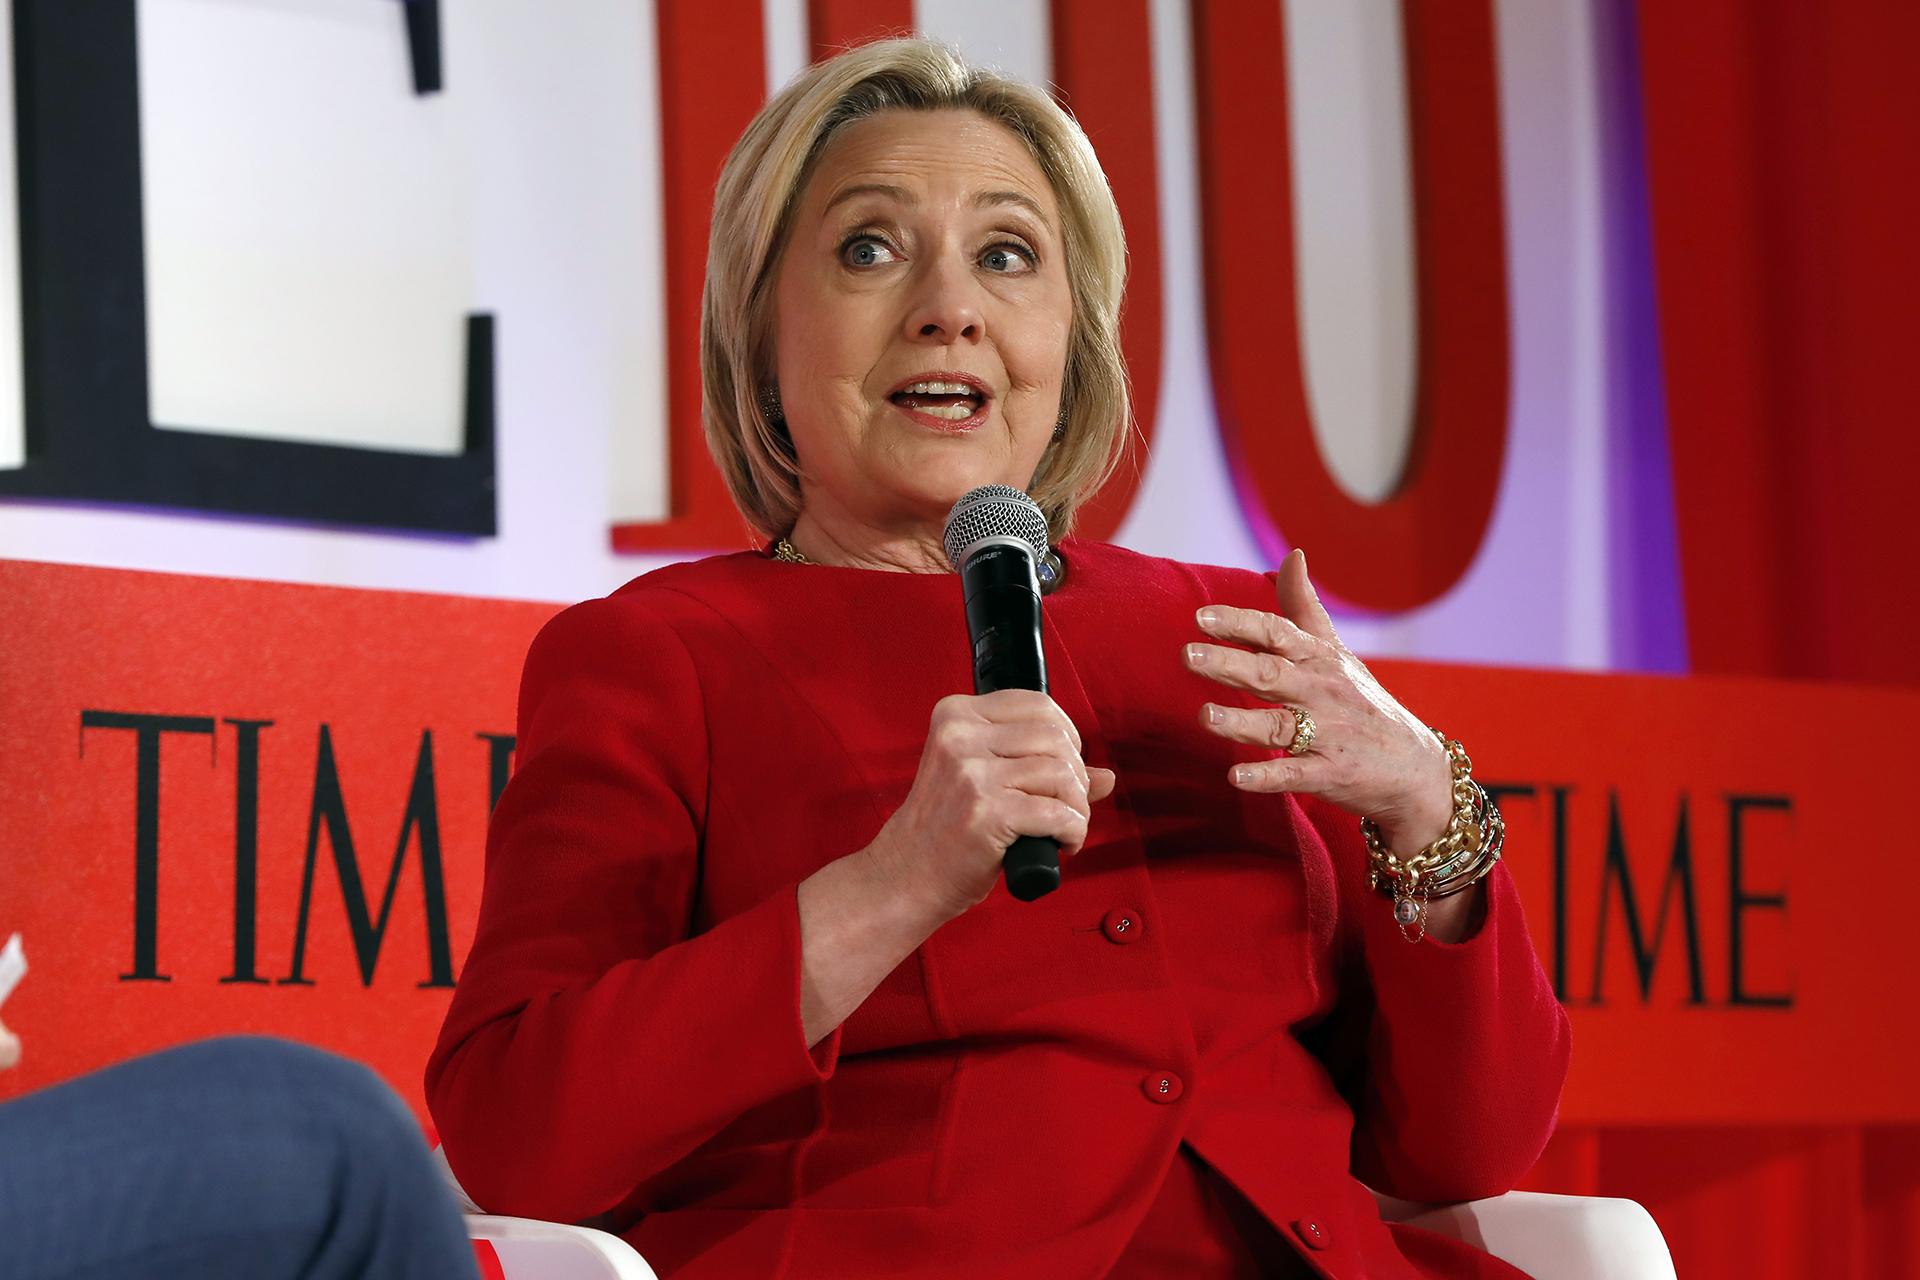 Hillary Clinton speaks during the TIME 100 Summit, in New York, Tuesday, April 23, 2019. (AP Photo / Richard Drew)